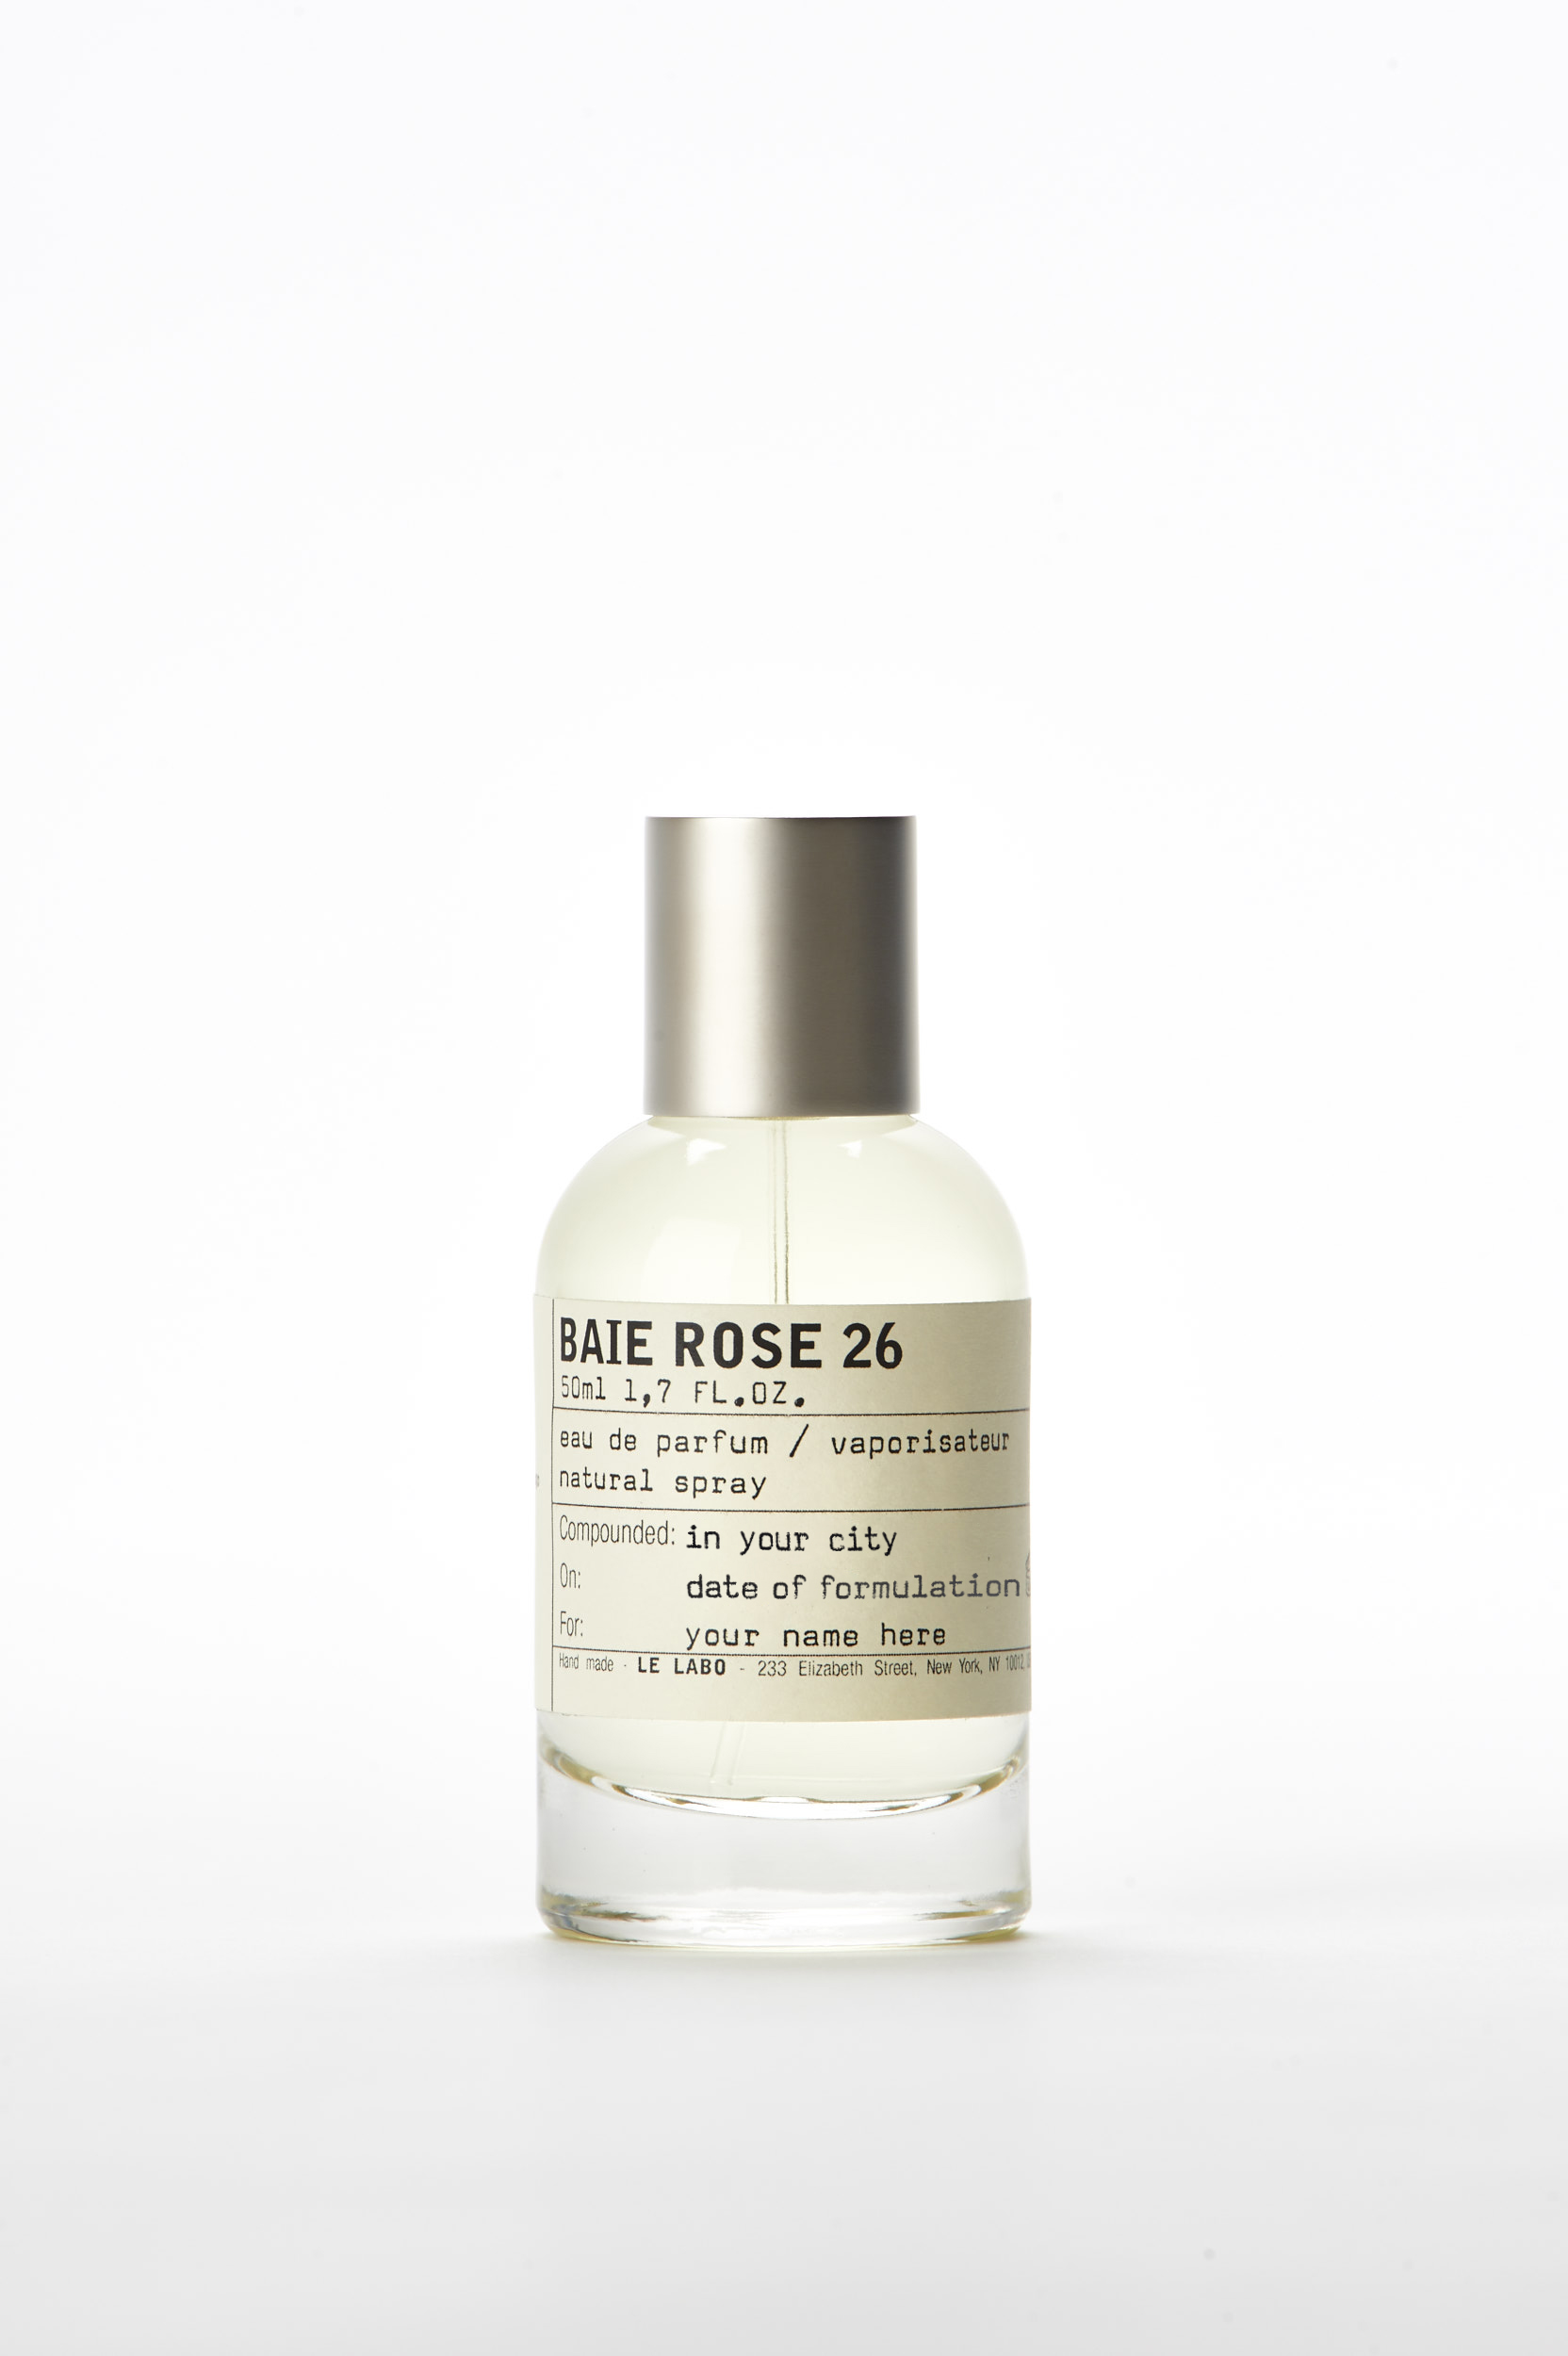 Le Labo Baie Rose 26 perfume 50ml - Front Row Edit by Cameron Tewson